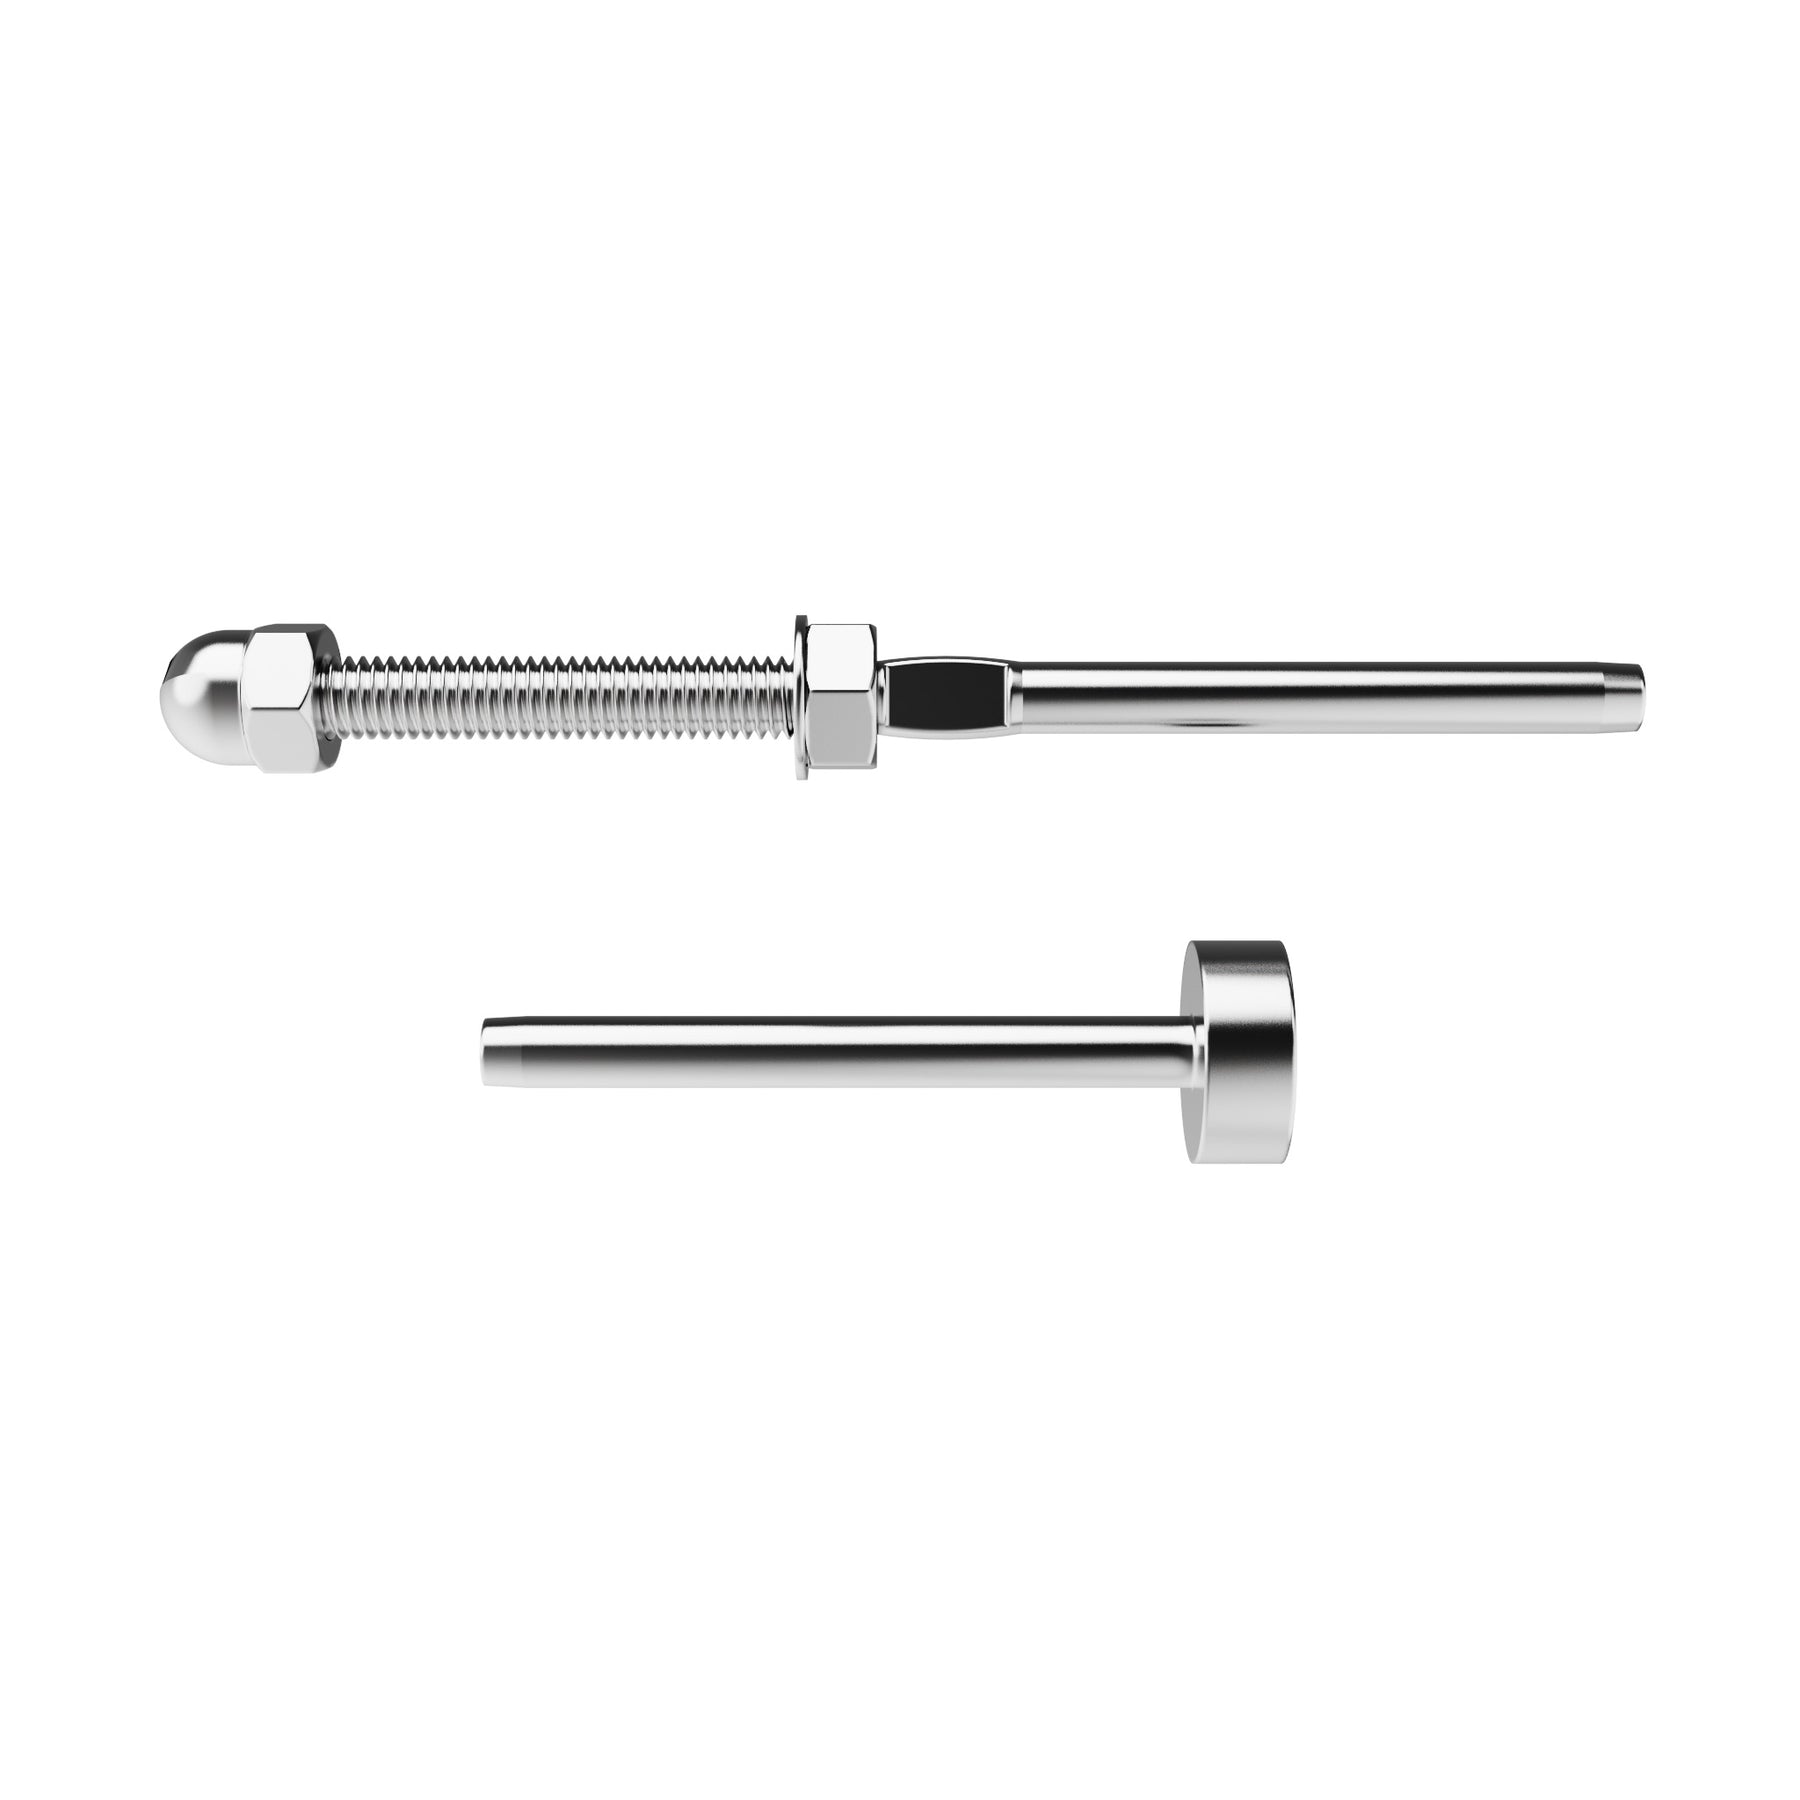 STLX-CC006 1/8" Cable Hardware Kit - Threaded Terminal Stud End and Fixed End